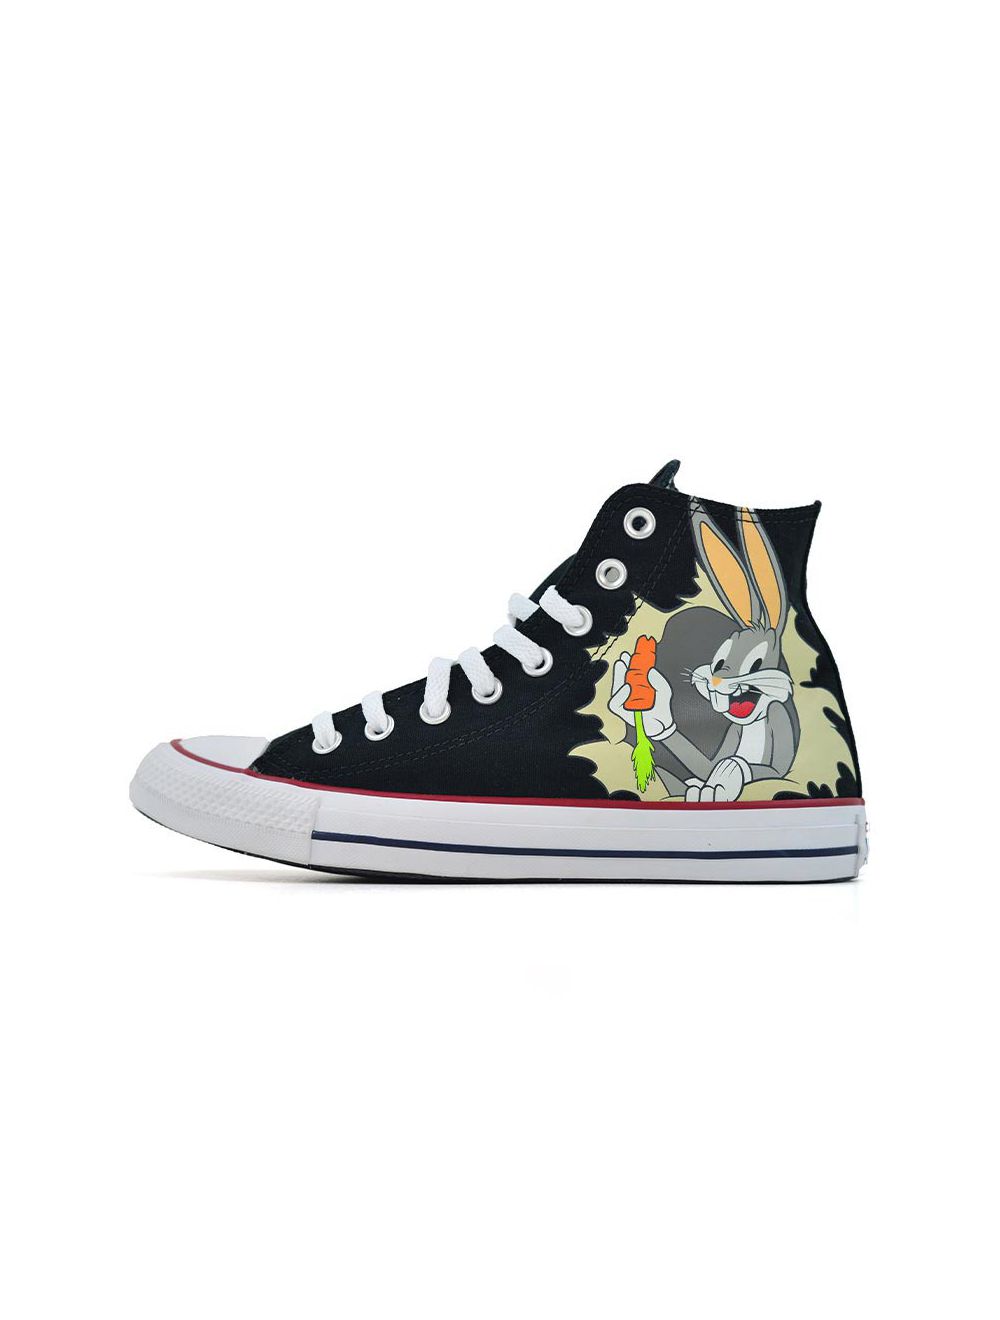 converse and looney tunes